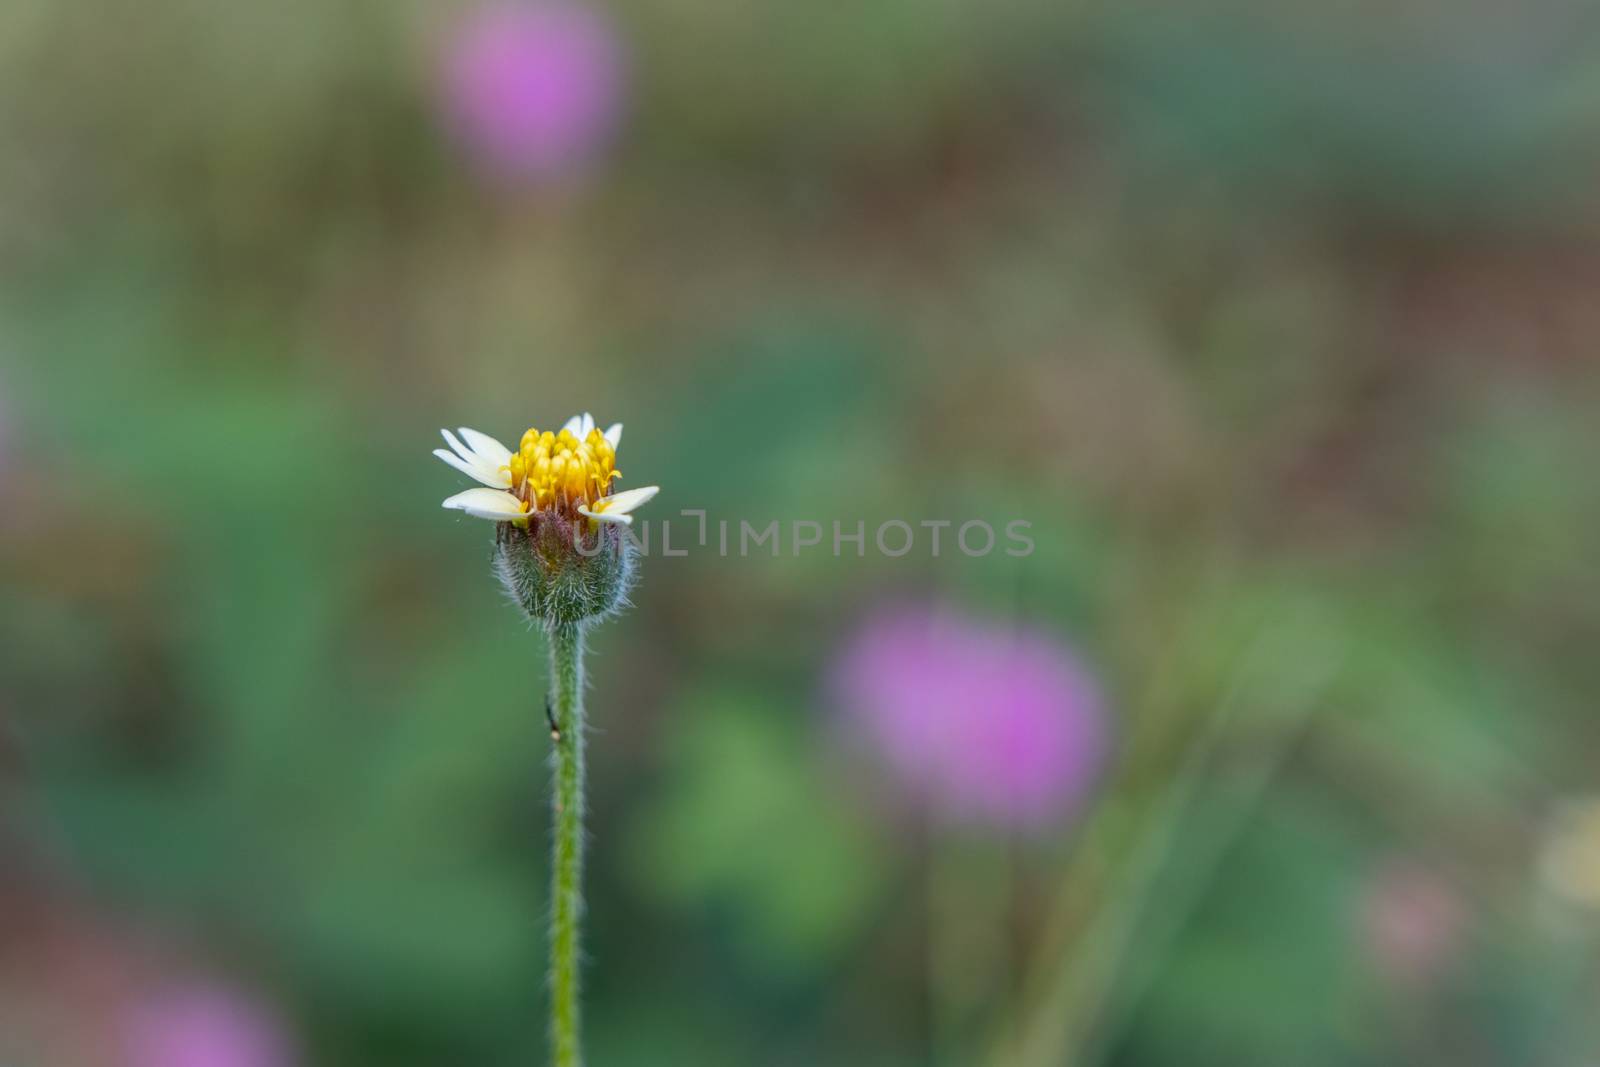 white wild daisy grass flowers under summer sunlight selective focus green grass field with blur authentic outdoor background by peerapixs